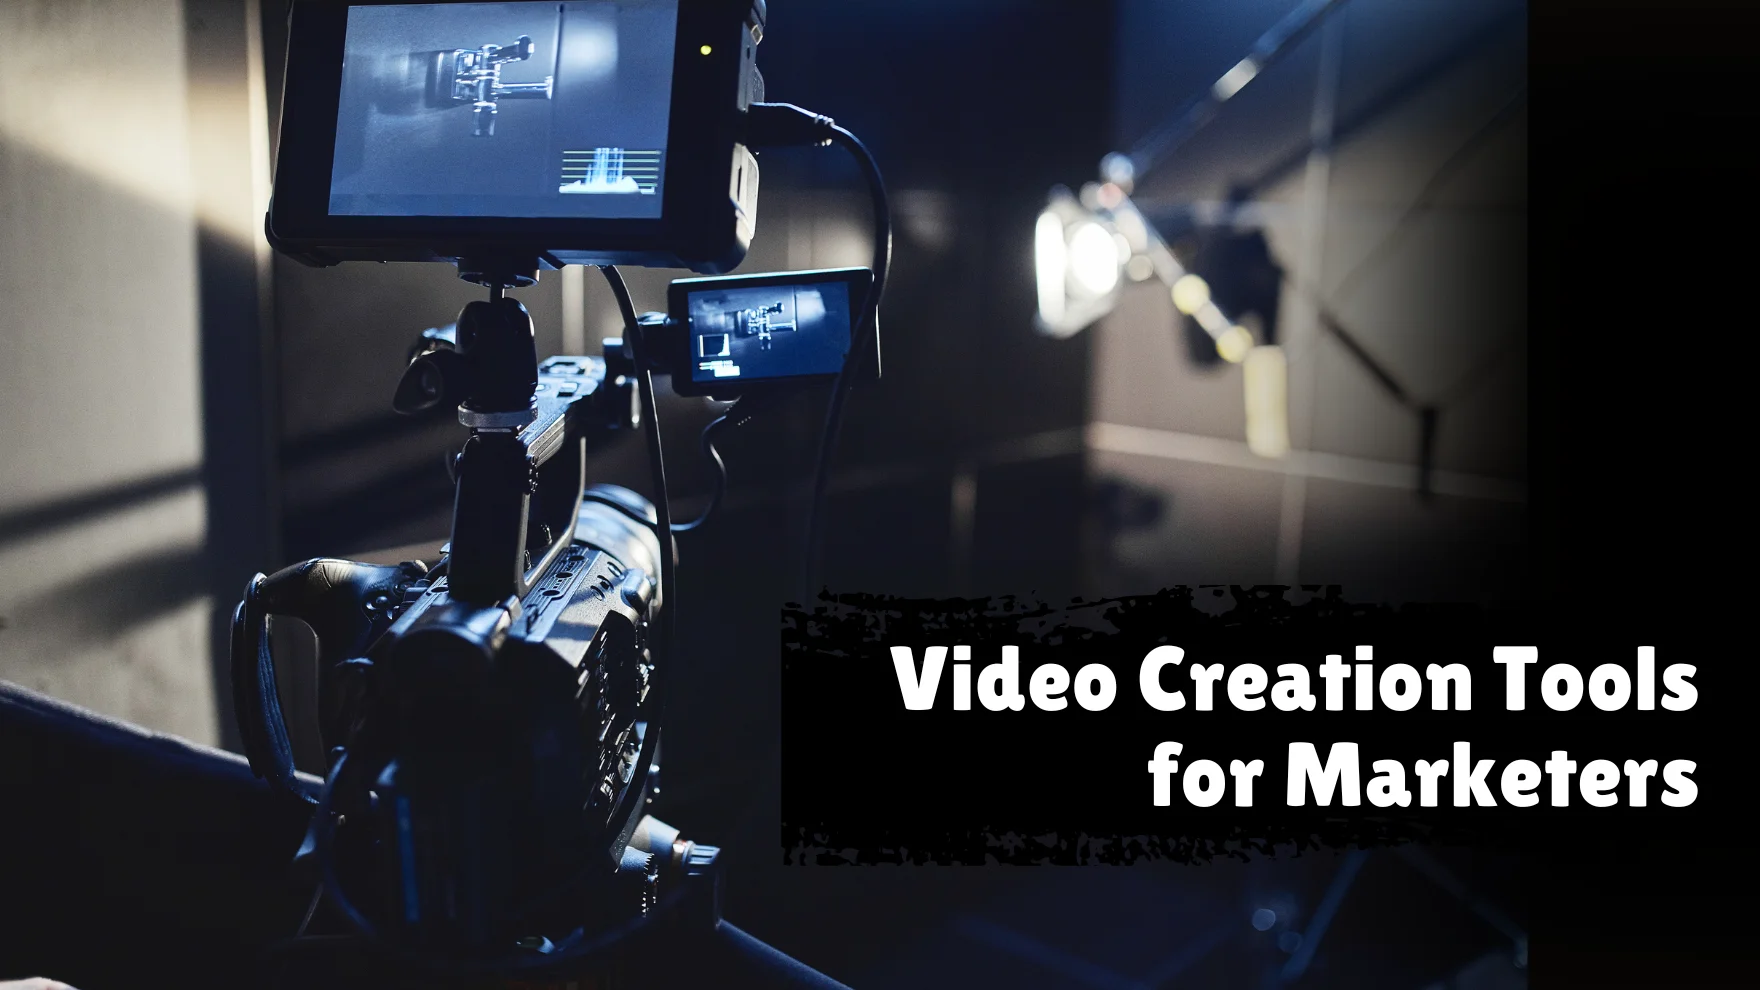 Video Creation Tools for Marketers